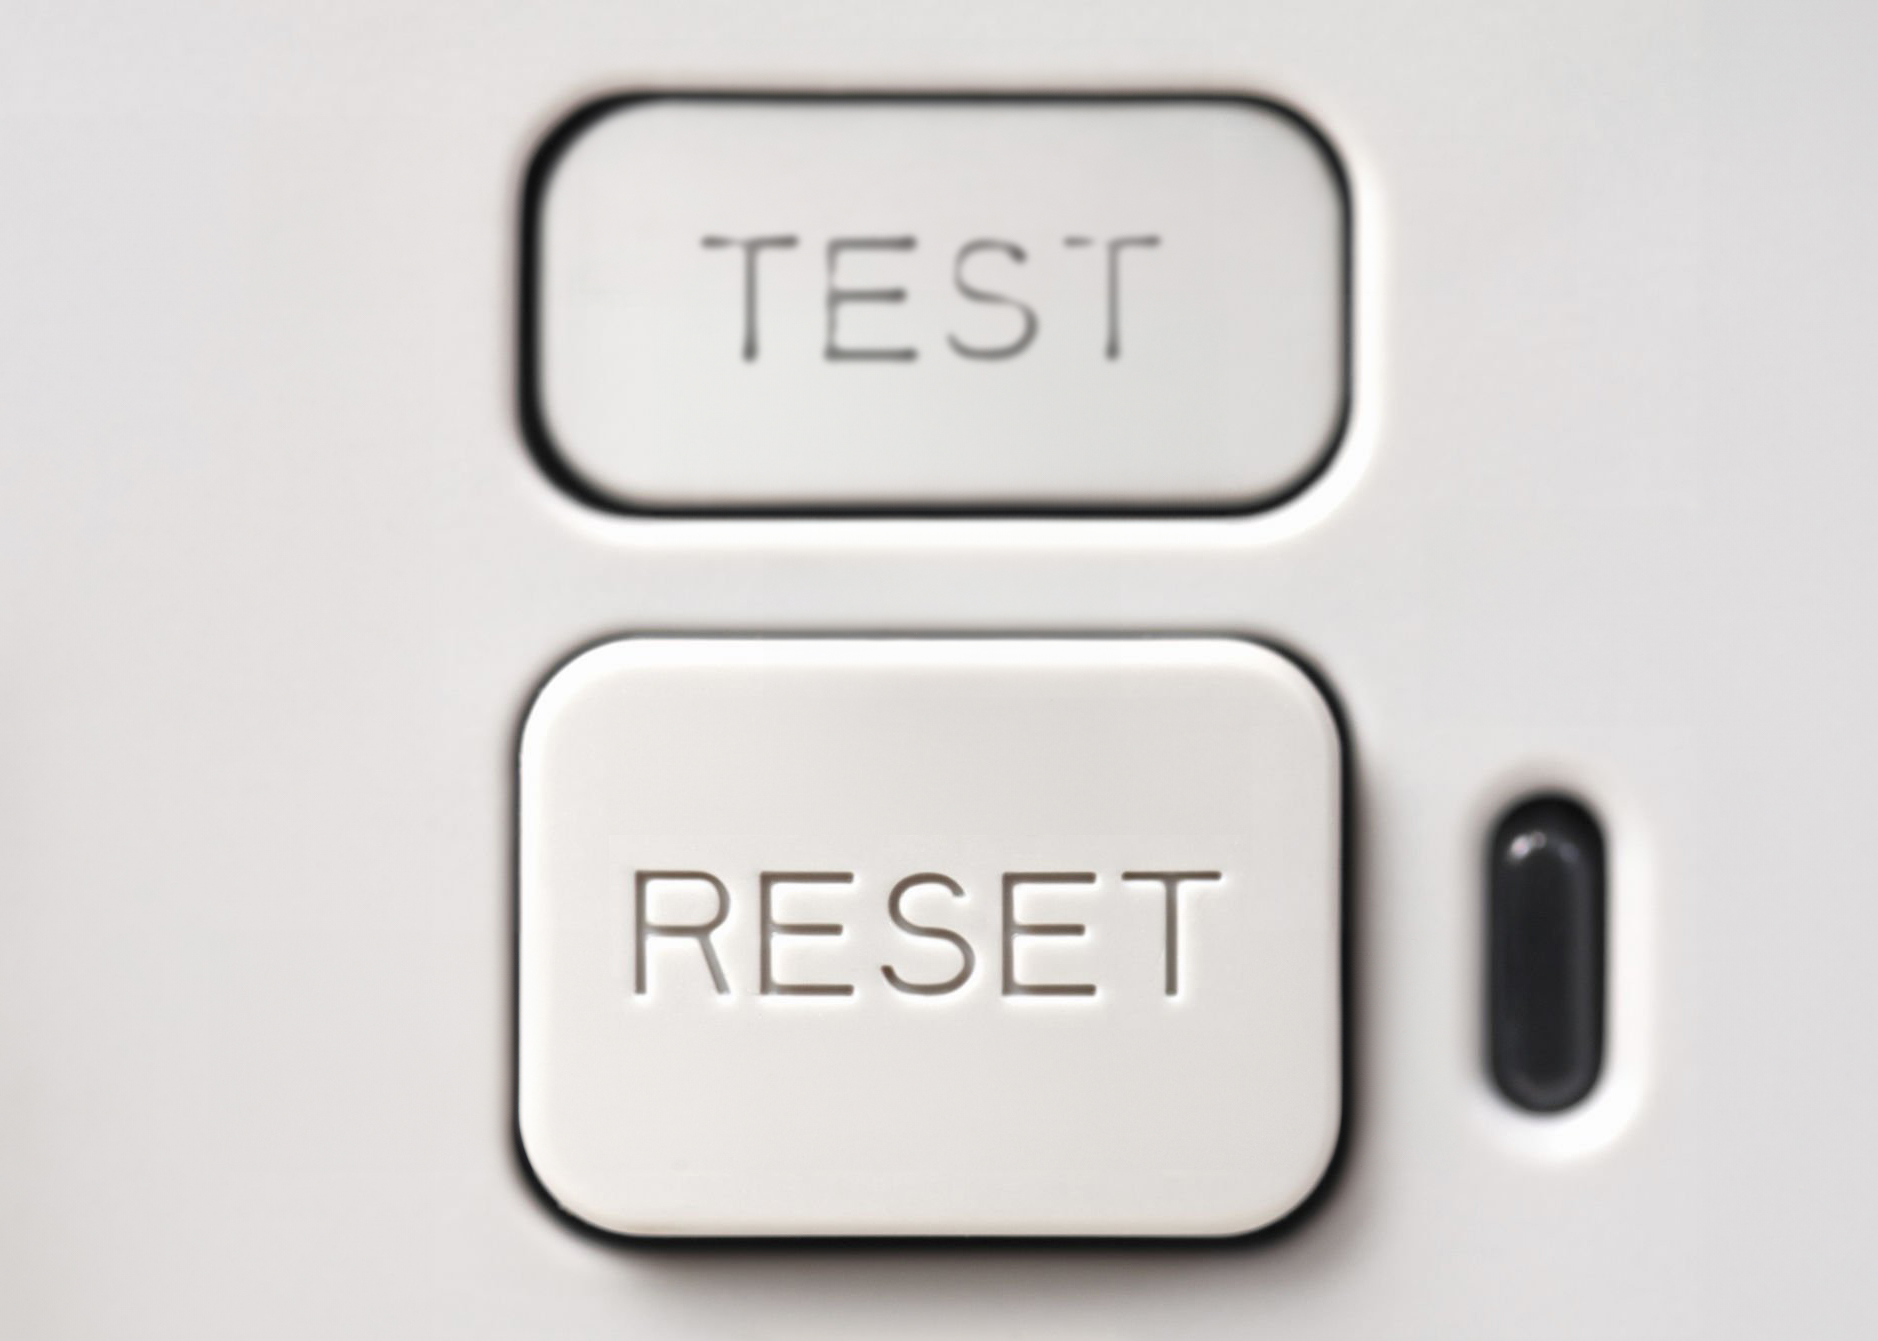 Reset and Test buttons on a GFCI electrical outlet.